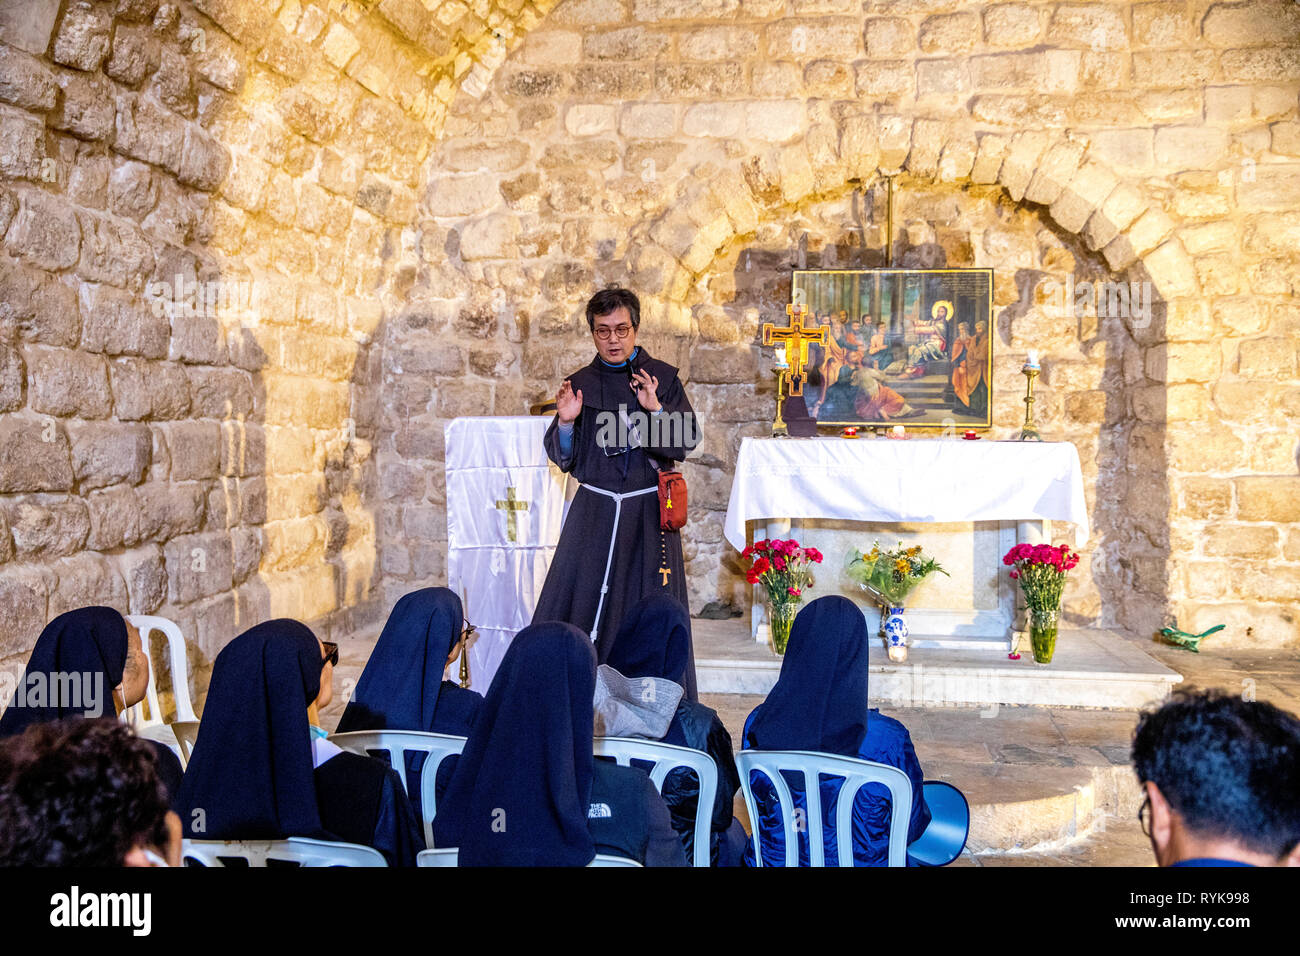 South Korean clergy in the synagogue church, Nazareth, galilee, israel. Stock Photo